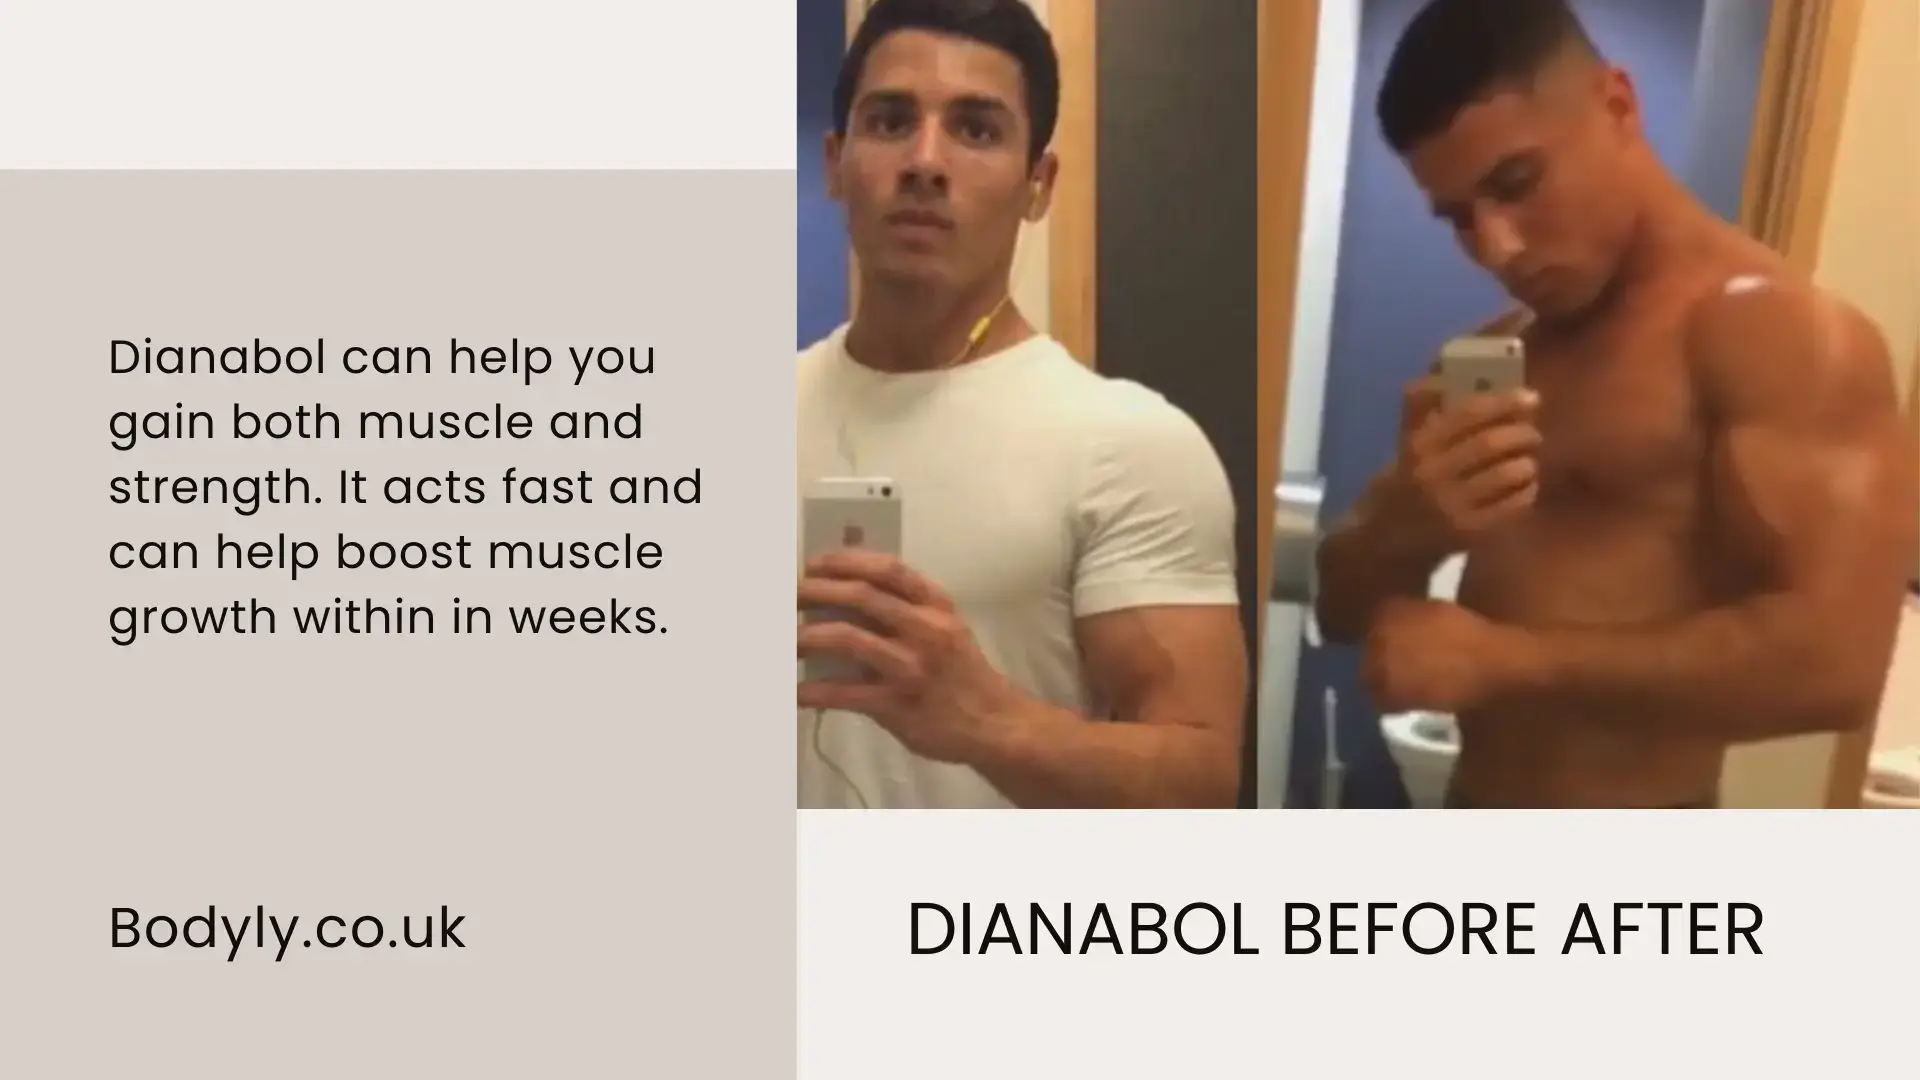 Dianabol before after